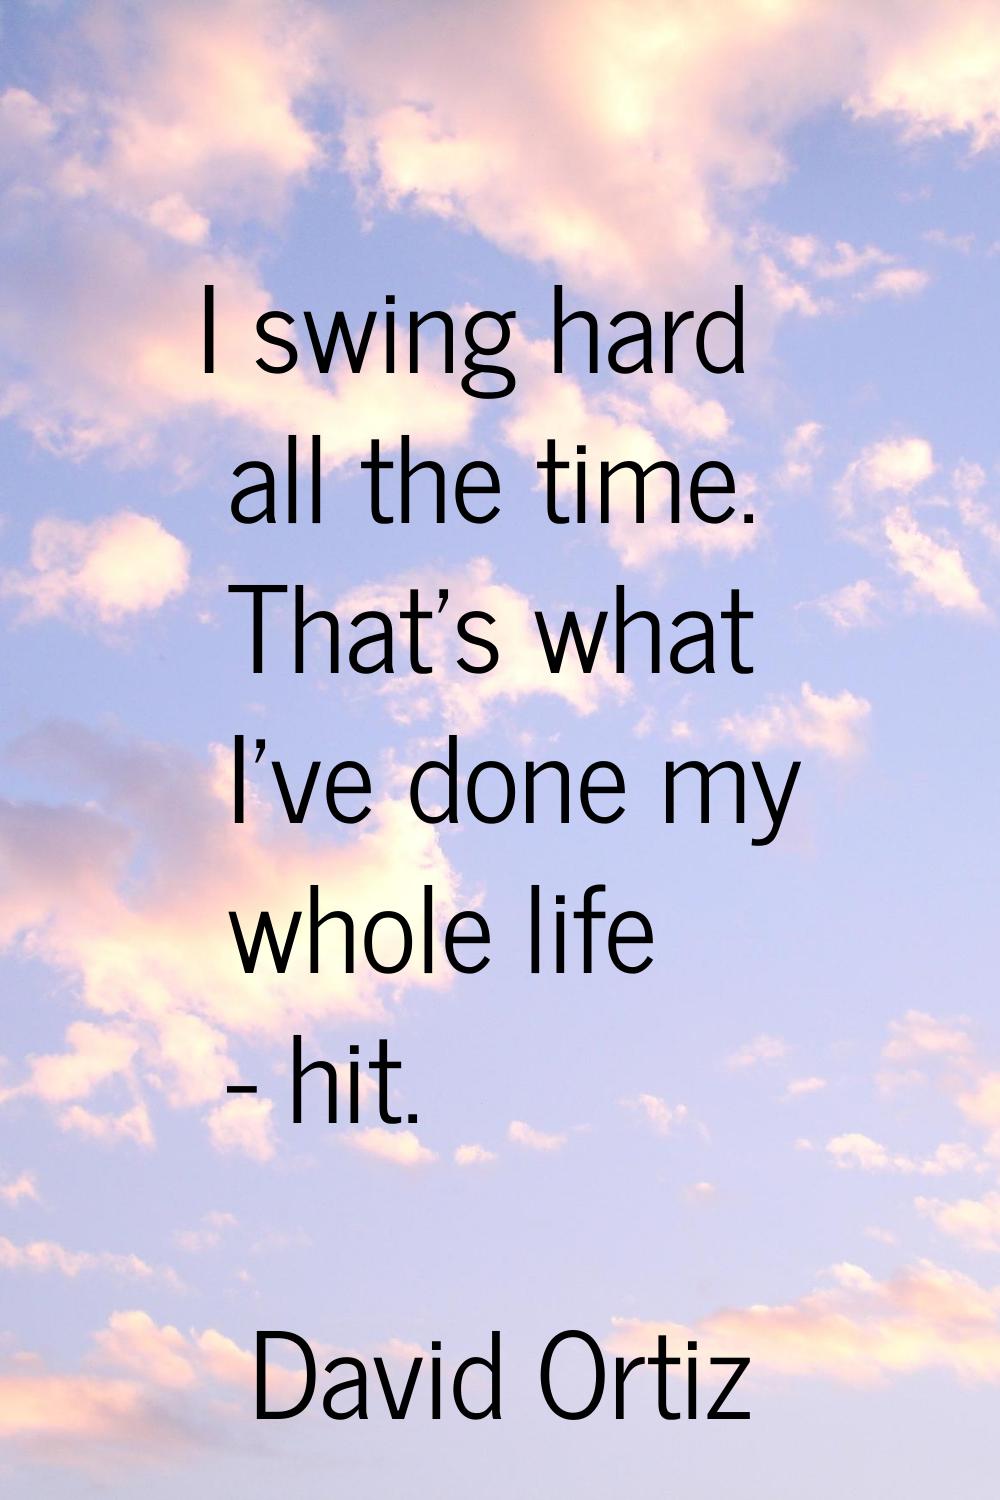 I swing hard all the time. That's what I've done my whole life - hit.